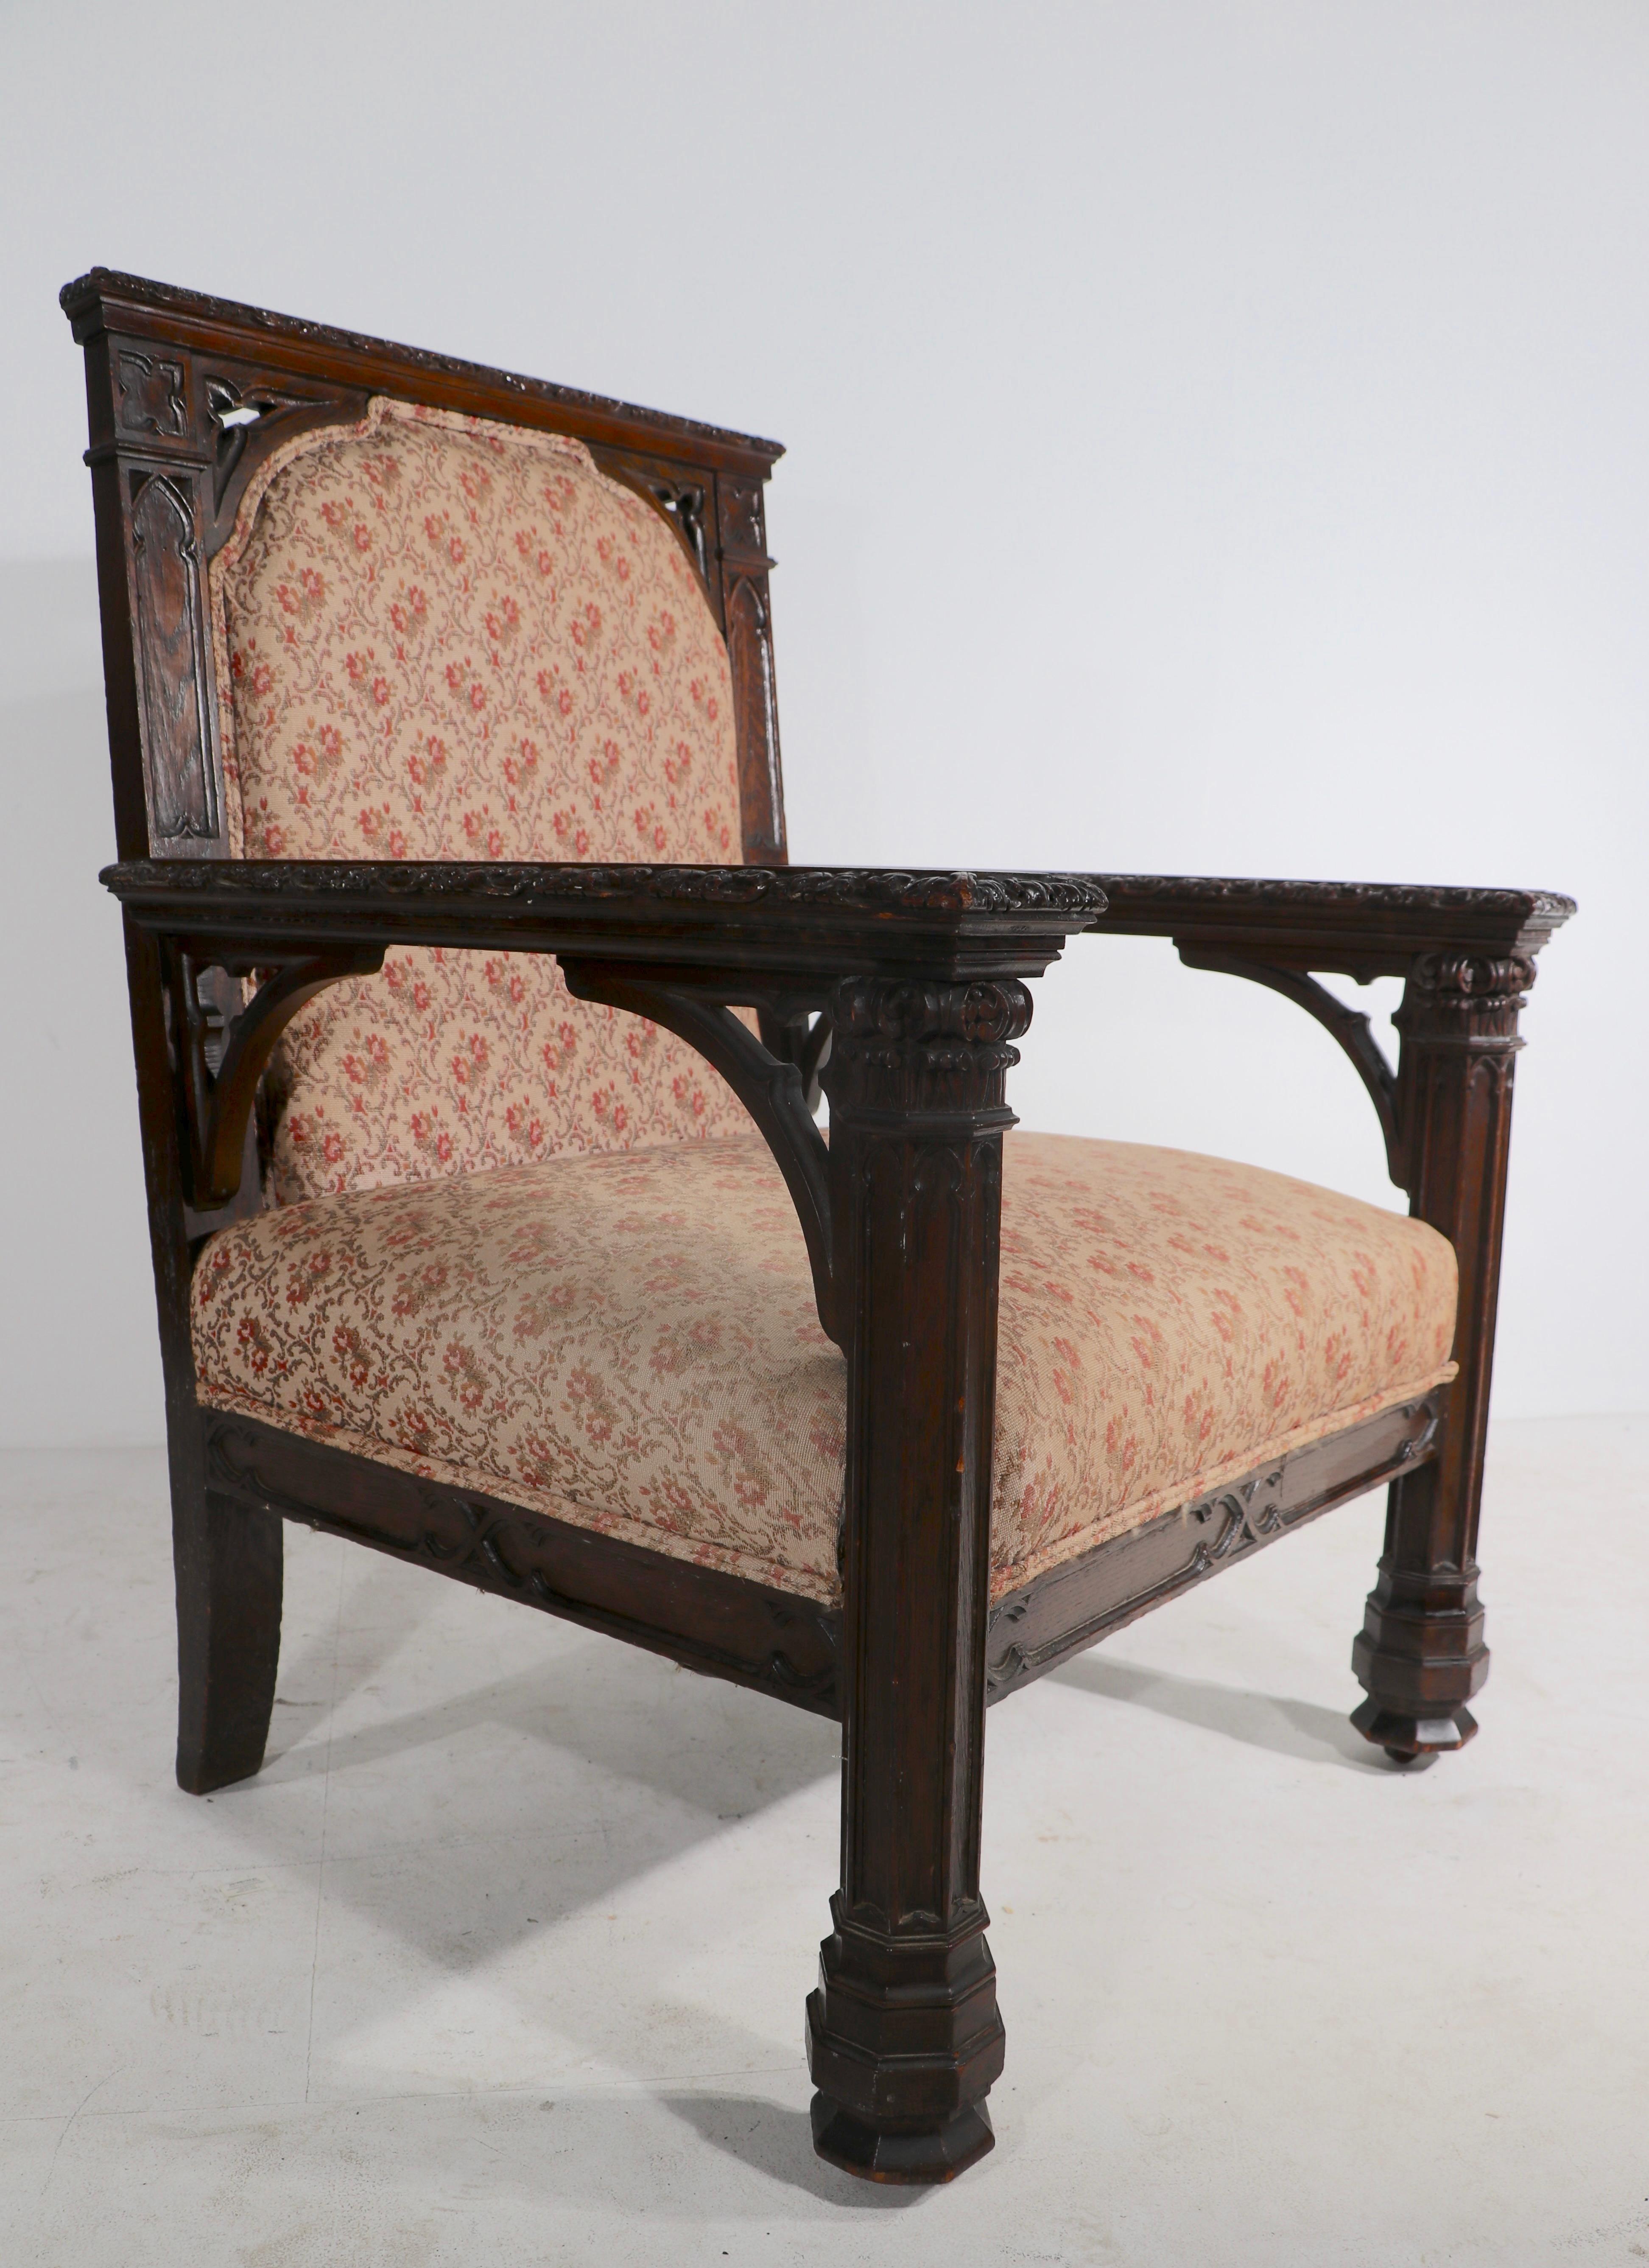 Upholstery Oversized Gothic Revival Throne Armchair For Sale